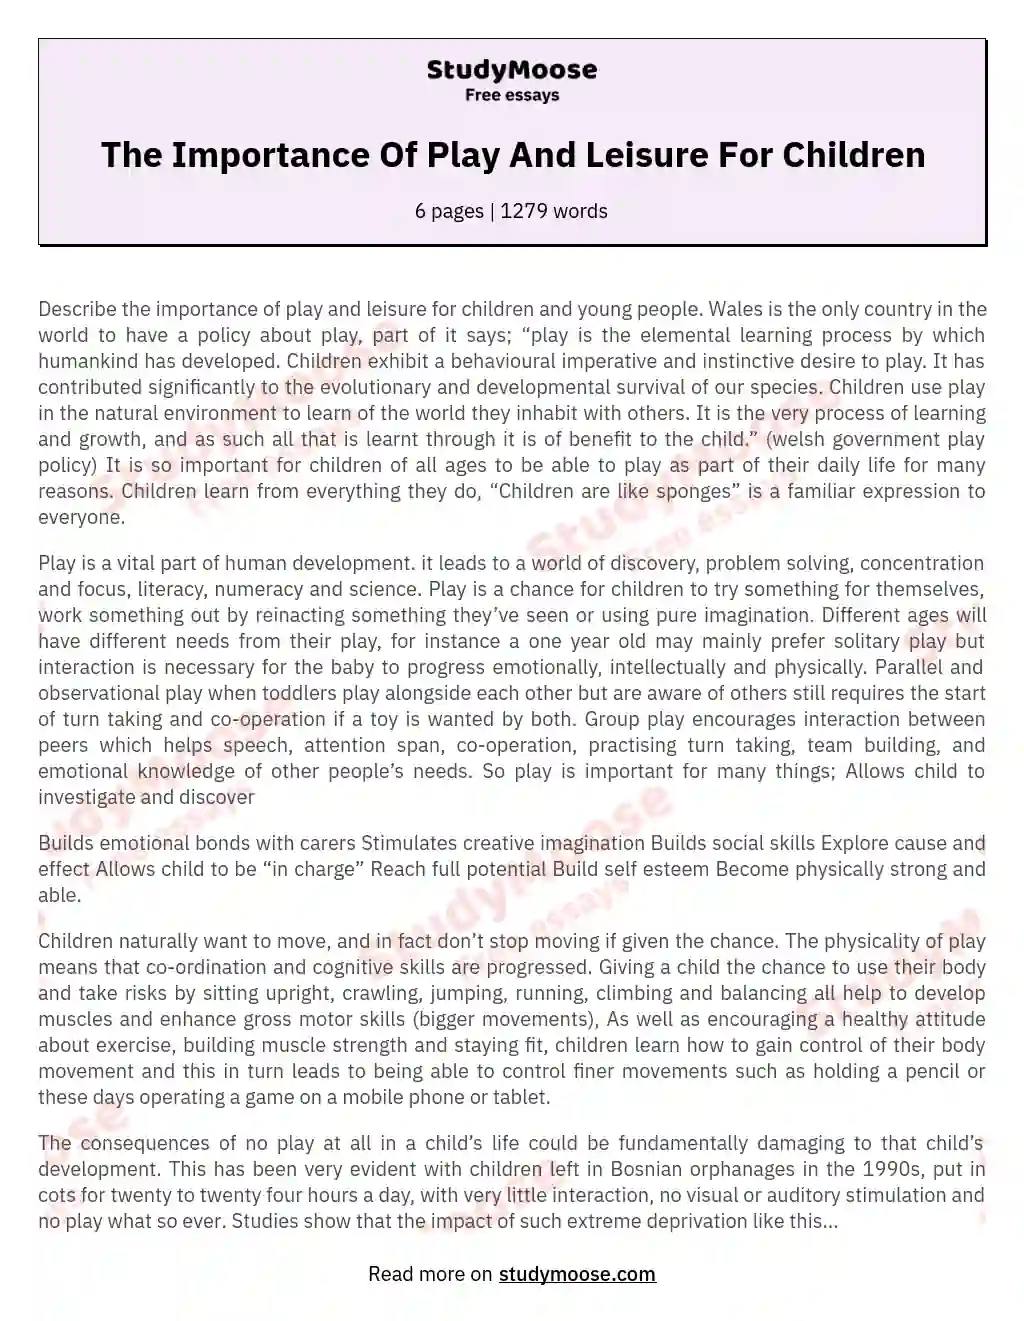 The Importance Of Play And Leisure For Children essay